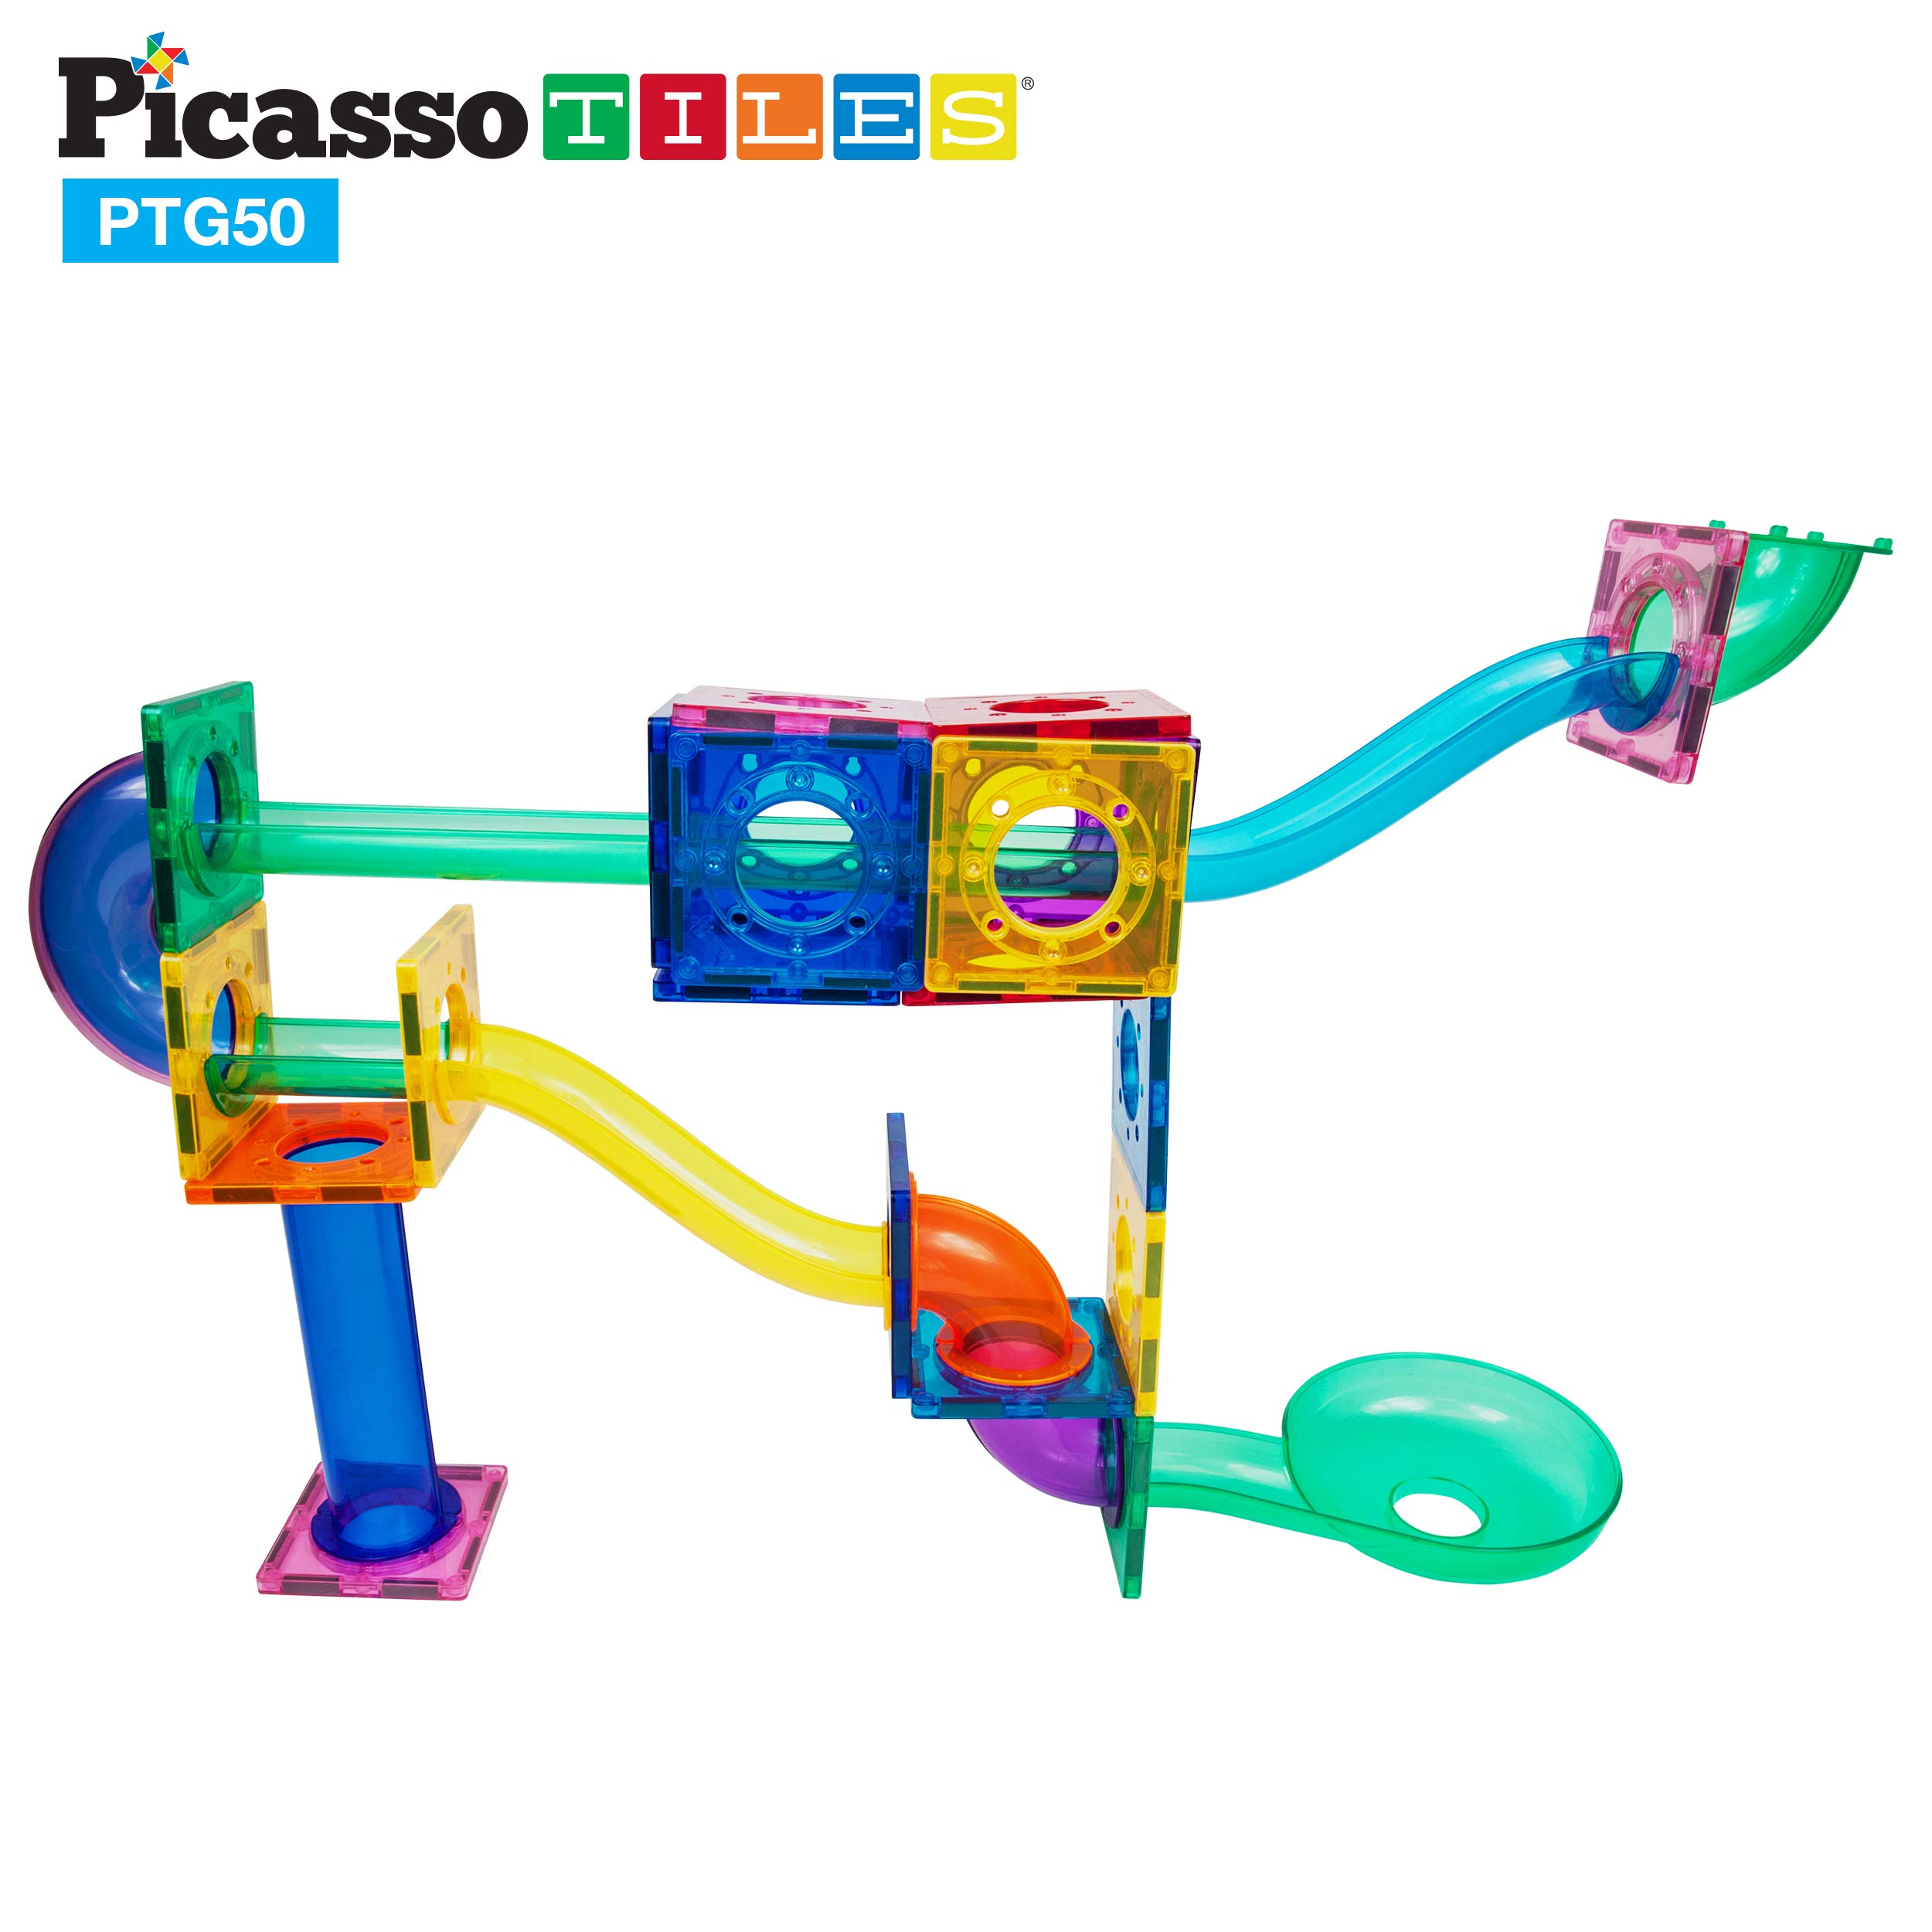 PicassoTiles 50PC Marble Run + 50PC Magnetic Race Car Track, Fun & Creative Playset: STEAM Learning, Enhance Construction Skills, Hand-Eye Coordination and Fine Motor Skills, Gift for Boys and Girls